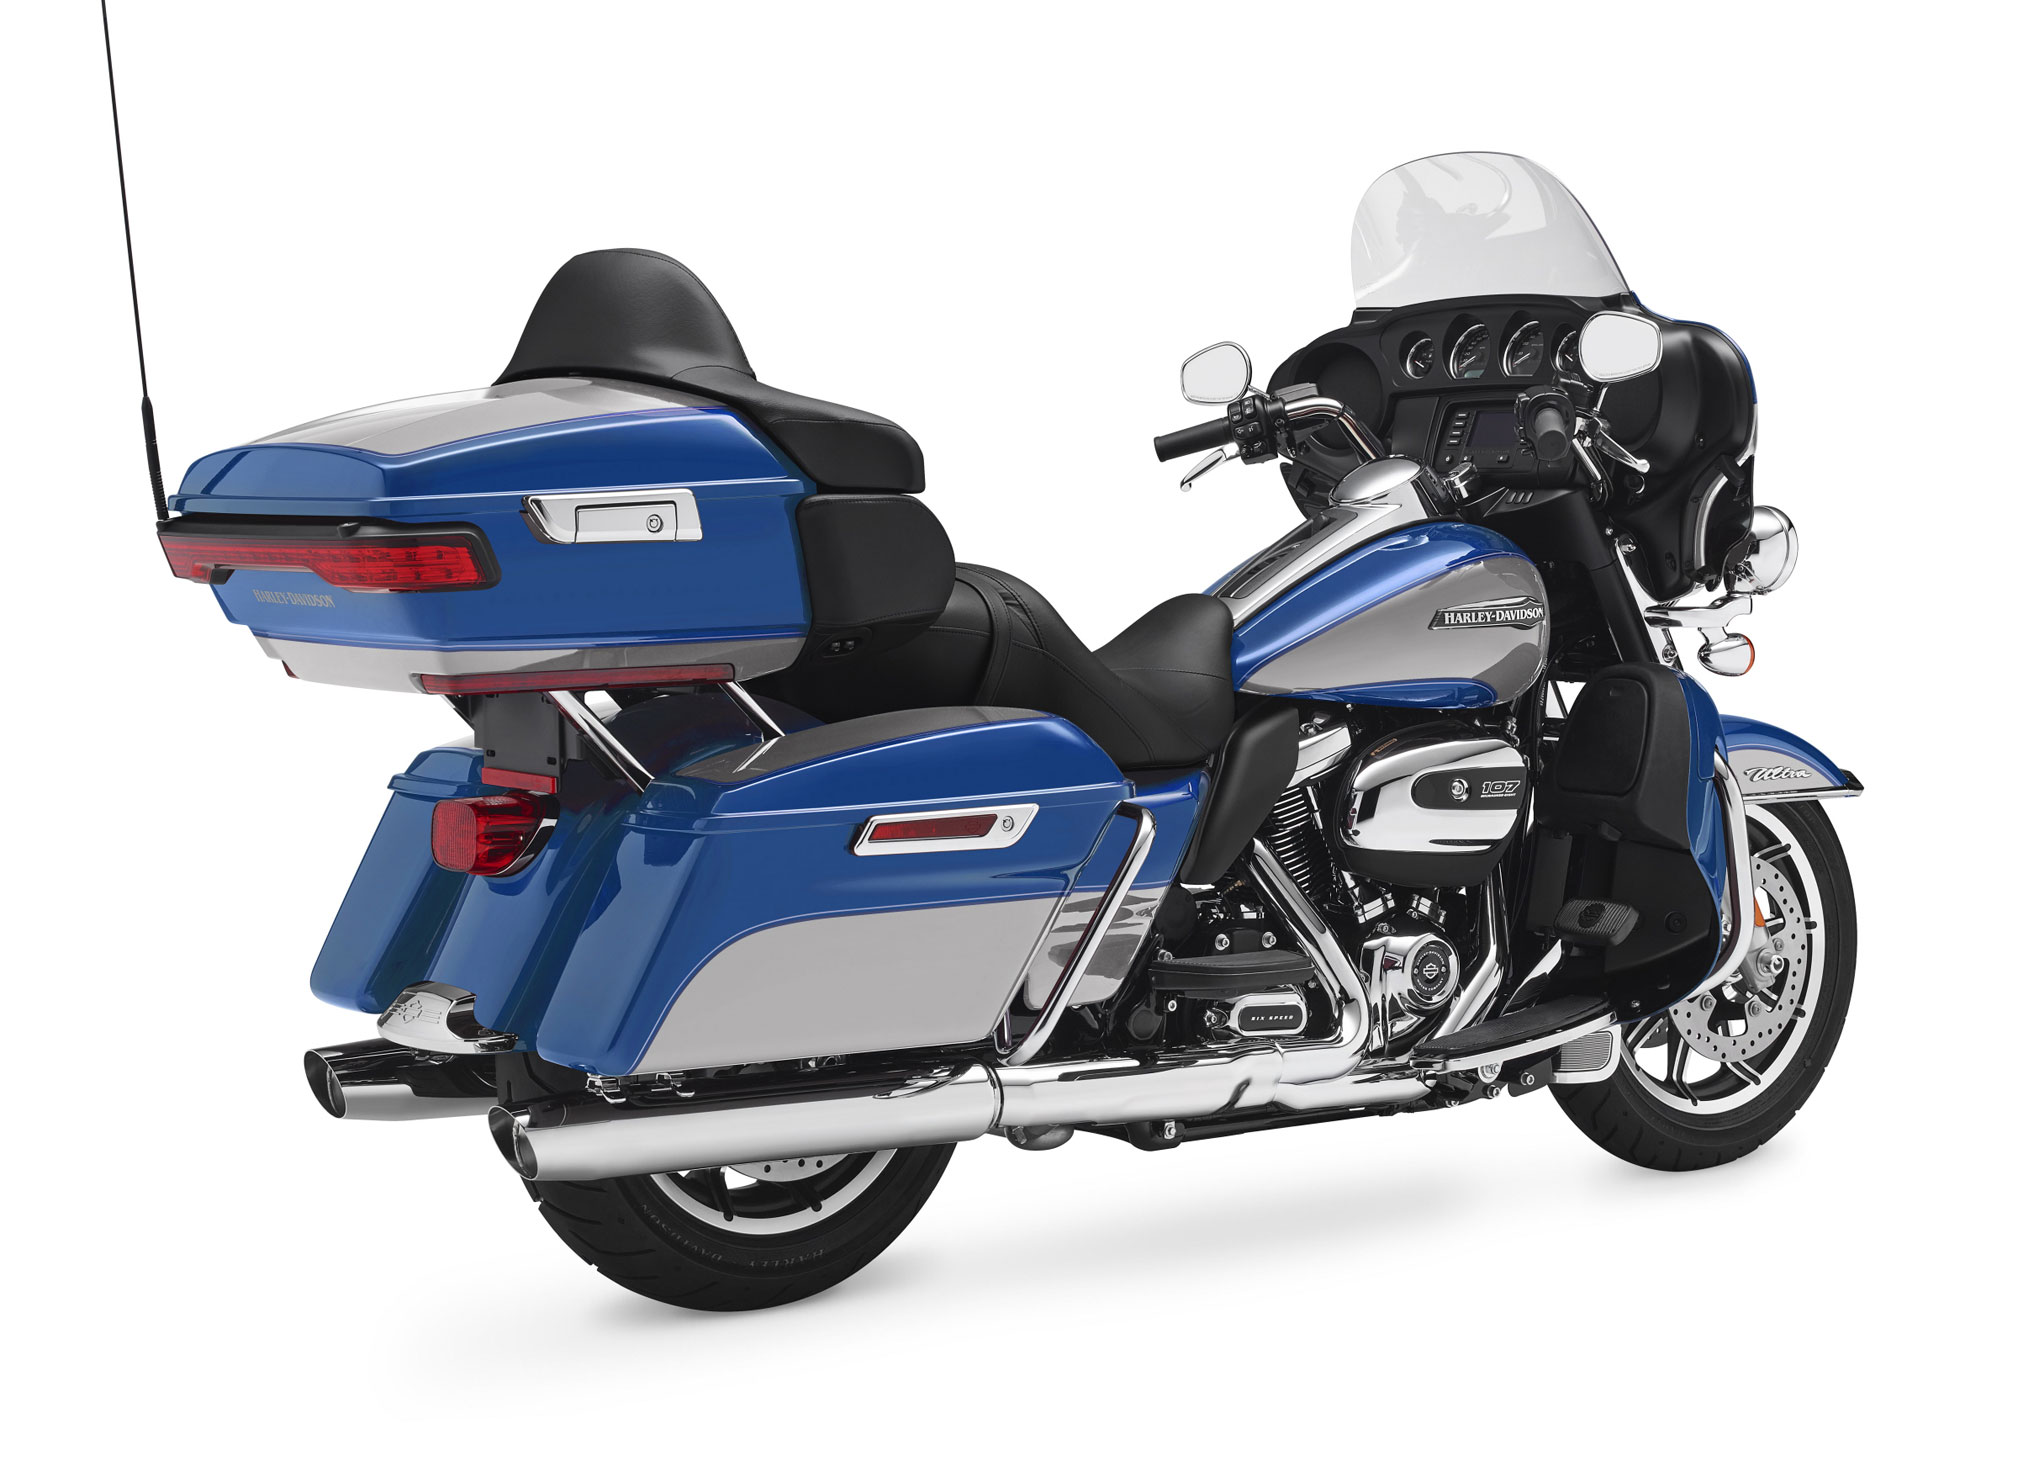 2018 Harley-Davidson Electra Glide Ultra Classic Review • Total Motorcycle